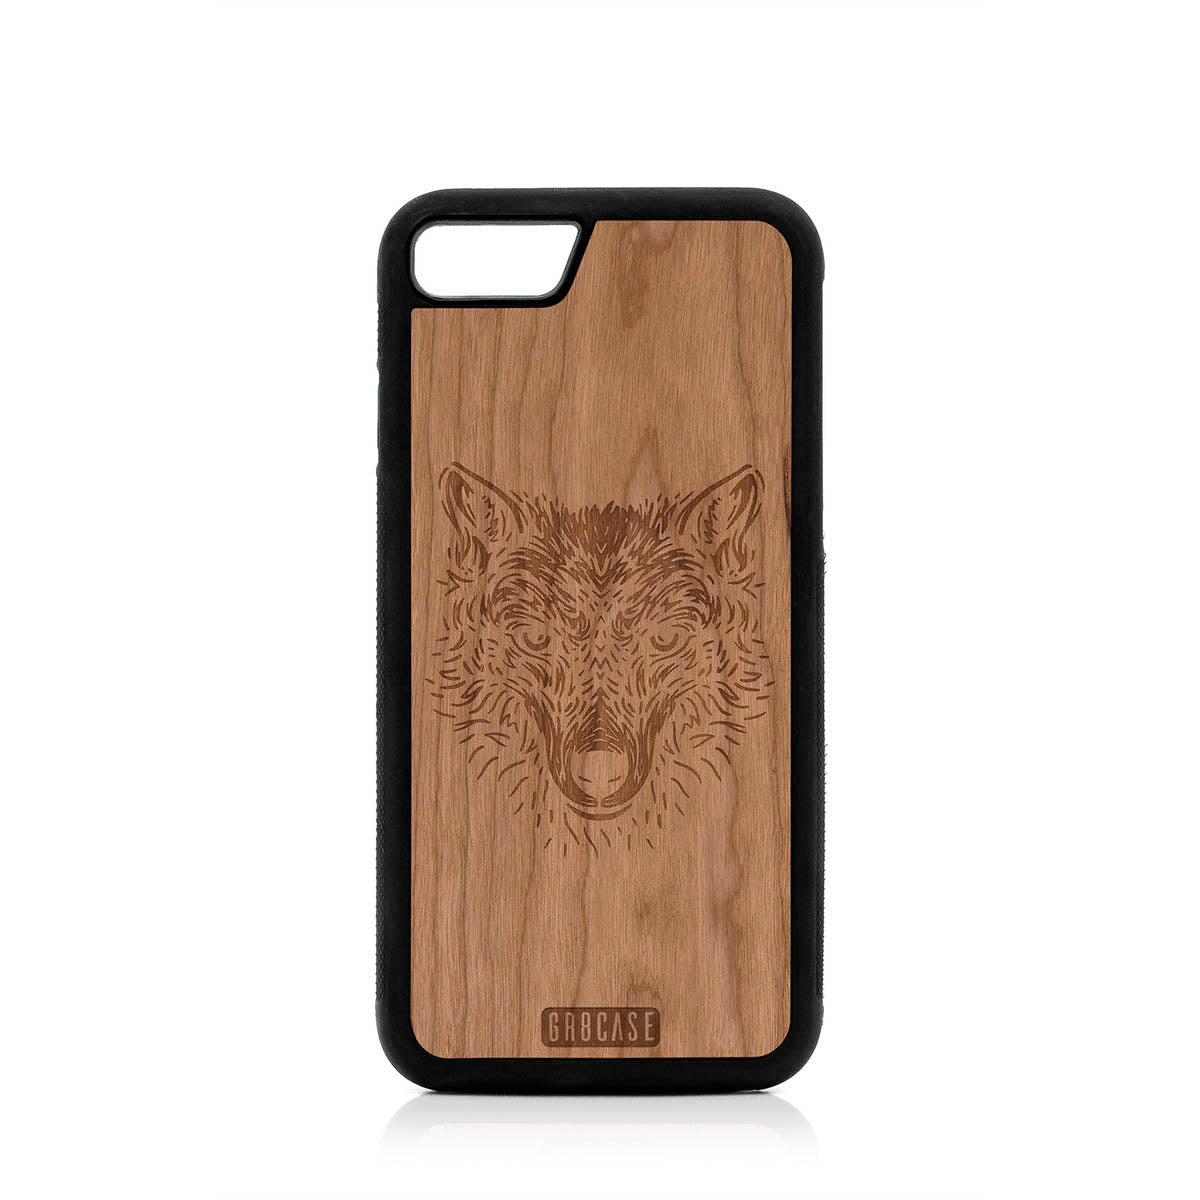 Furry Wolf Design Wood Case For iPhone 7/8